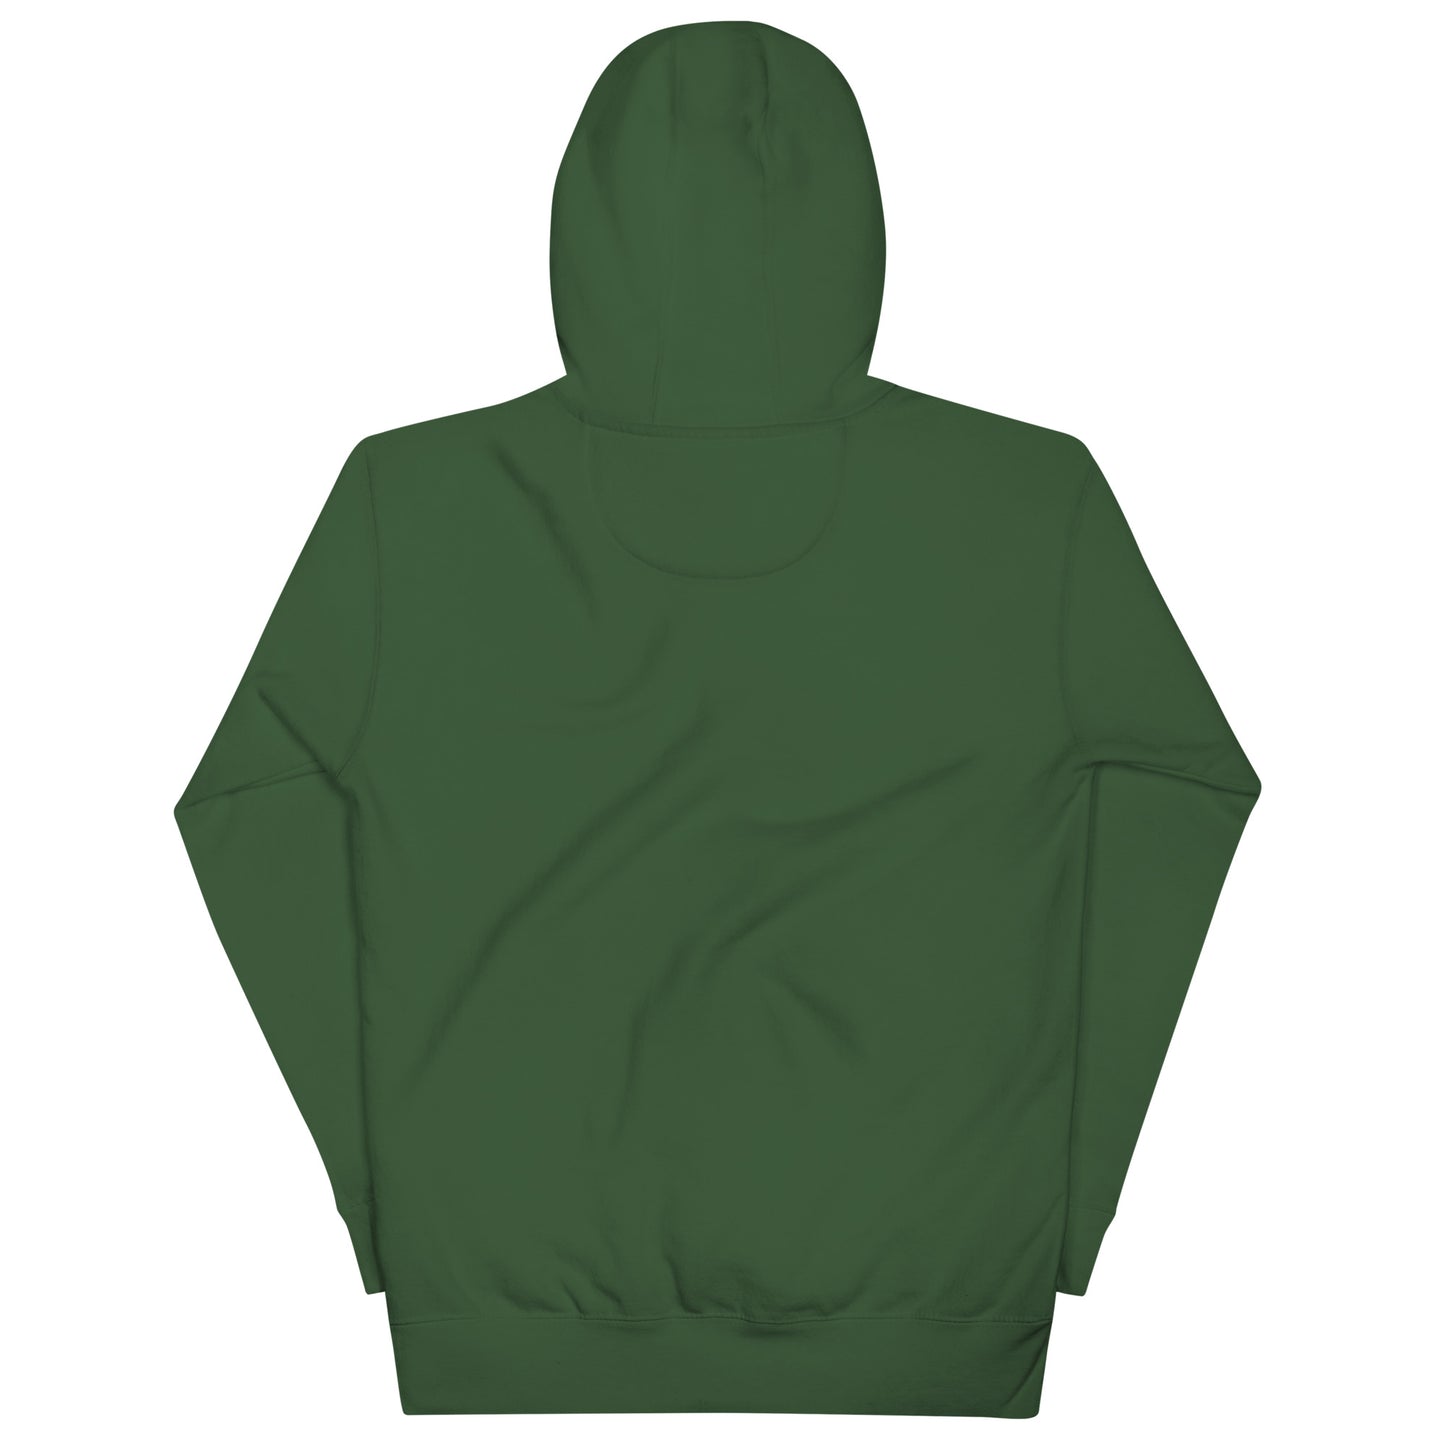 back of hoodie Leonardo green by B.Different Clothing independent streetwear brand inspired by street art graffiti